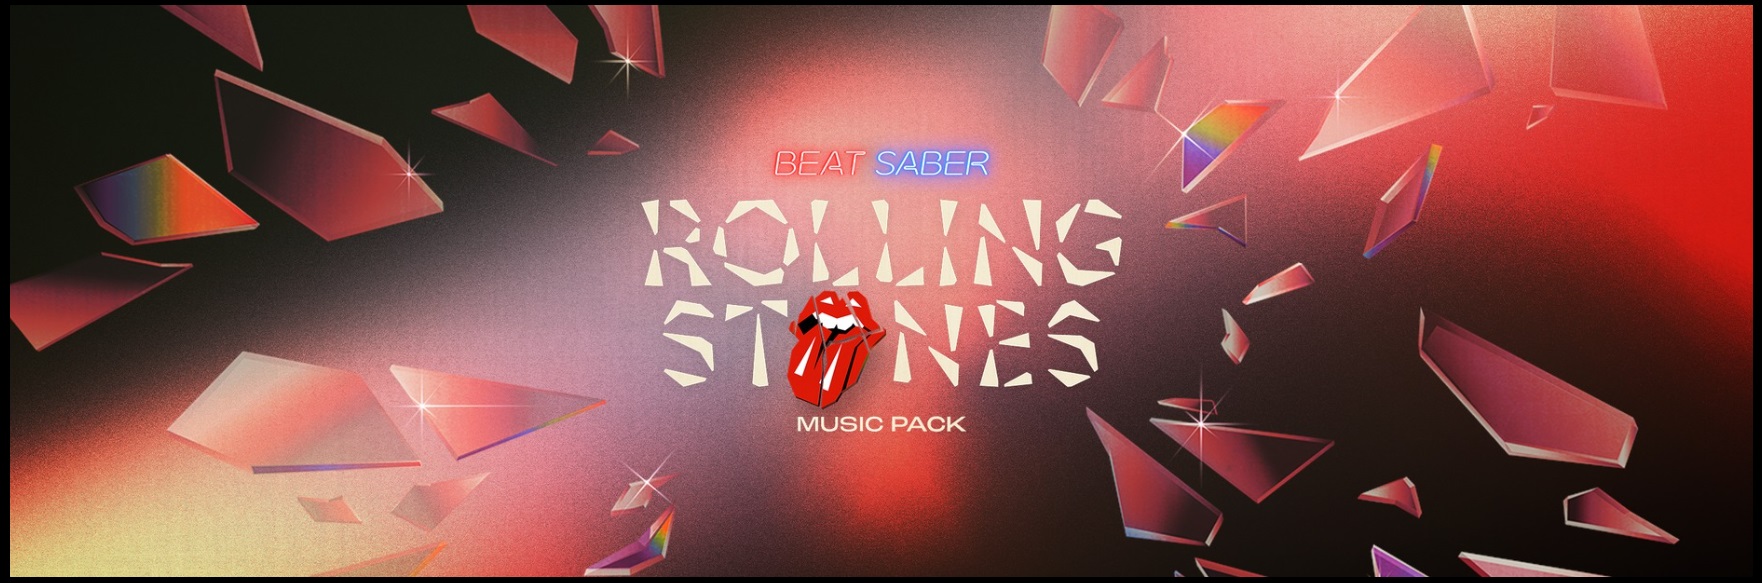 Beat Saber - The Rolling Stones Music Pack